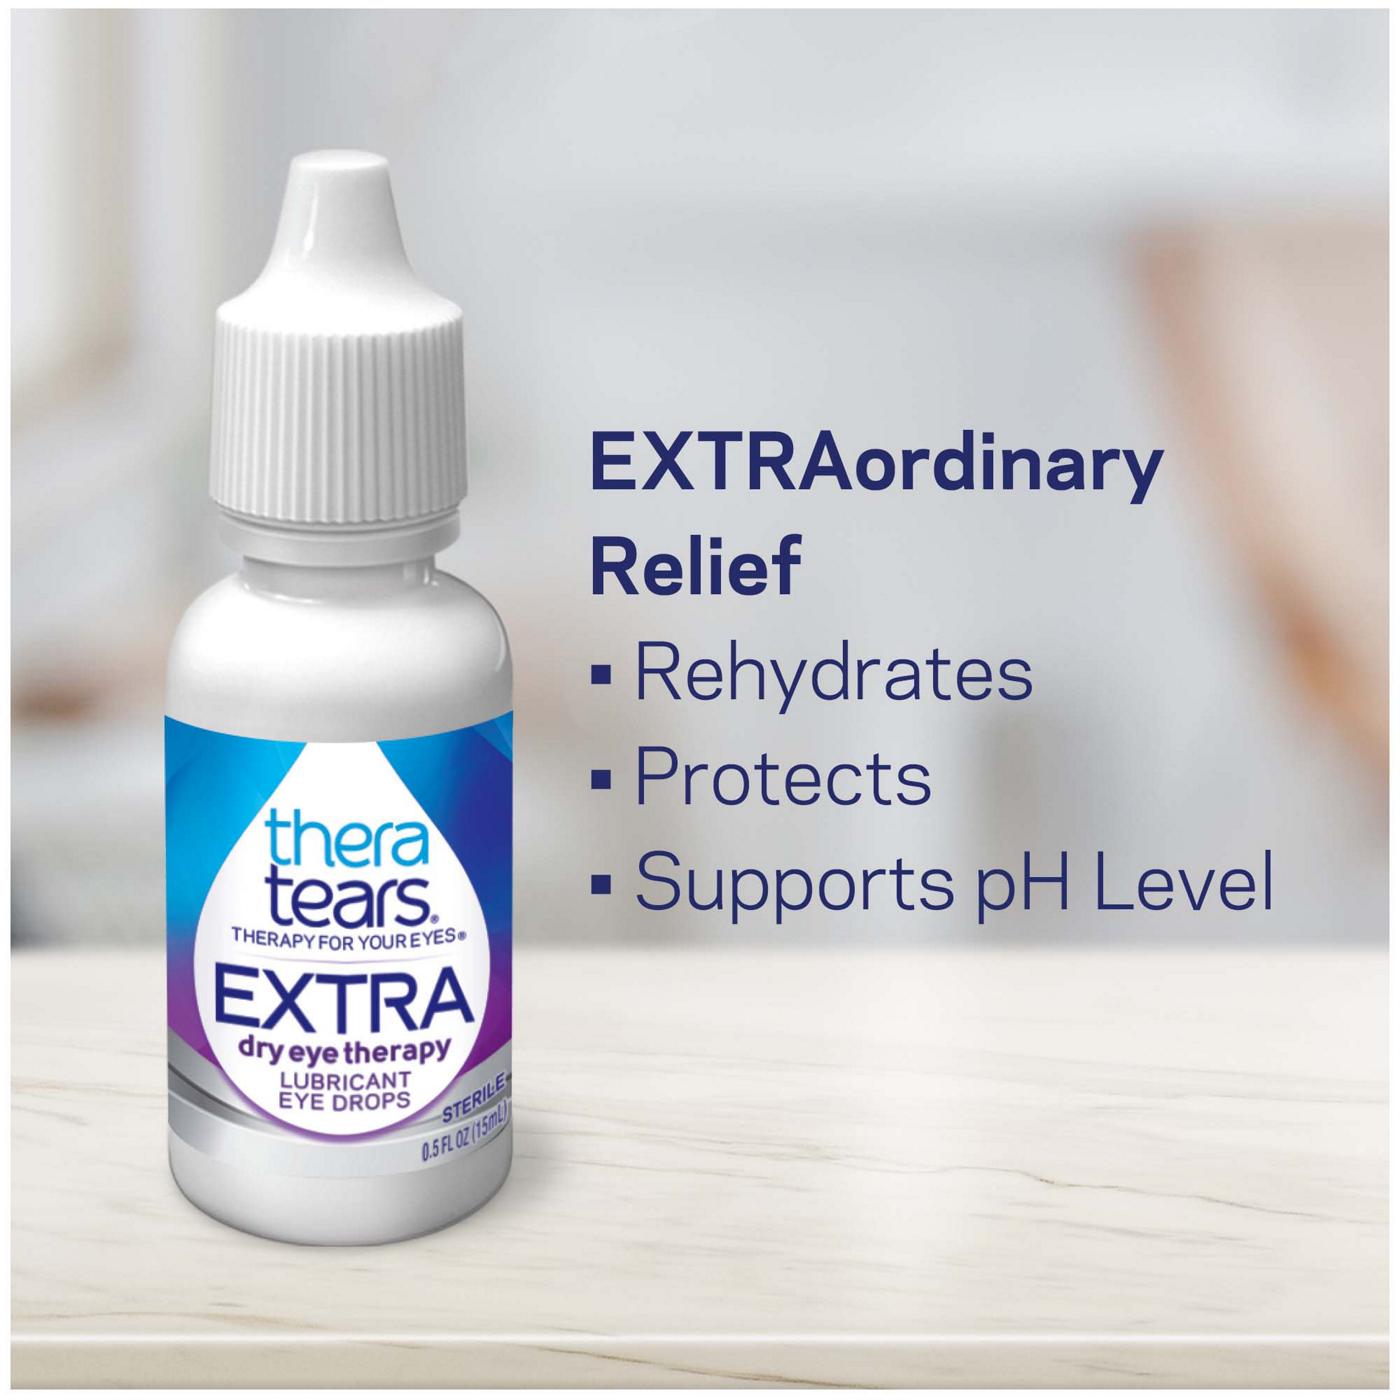 TheraTears Extra Dry Eye Drops, Twin Pack; image 4 of 5